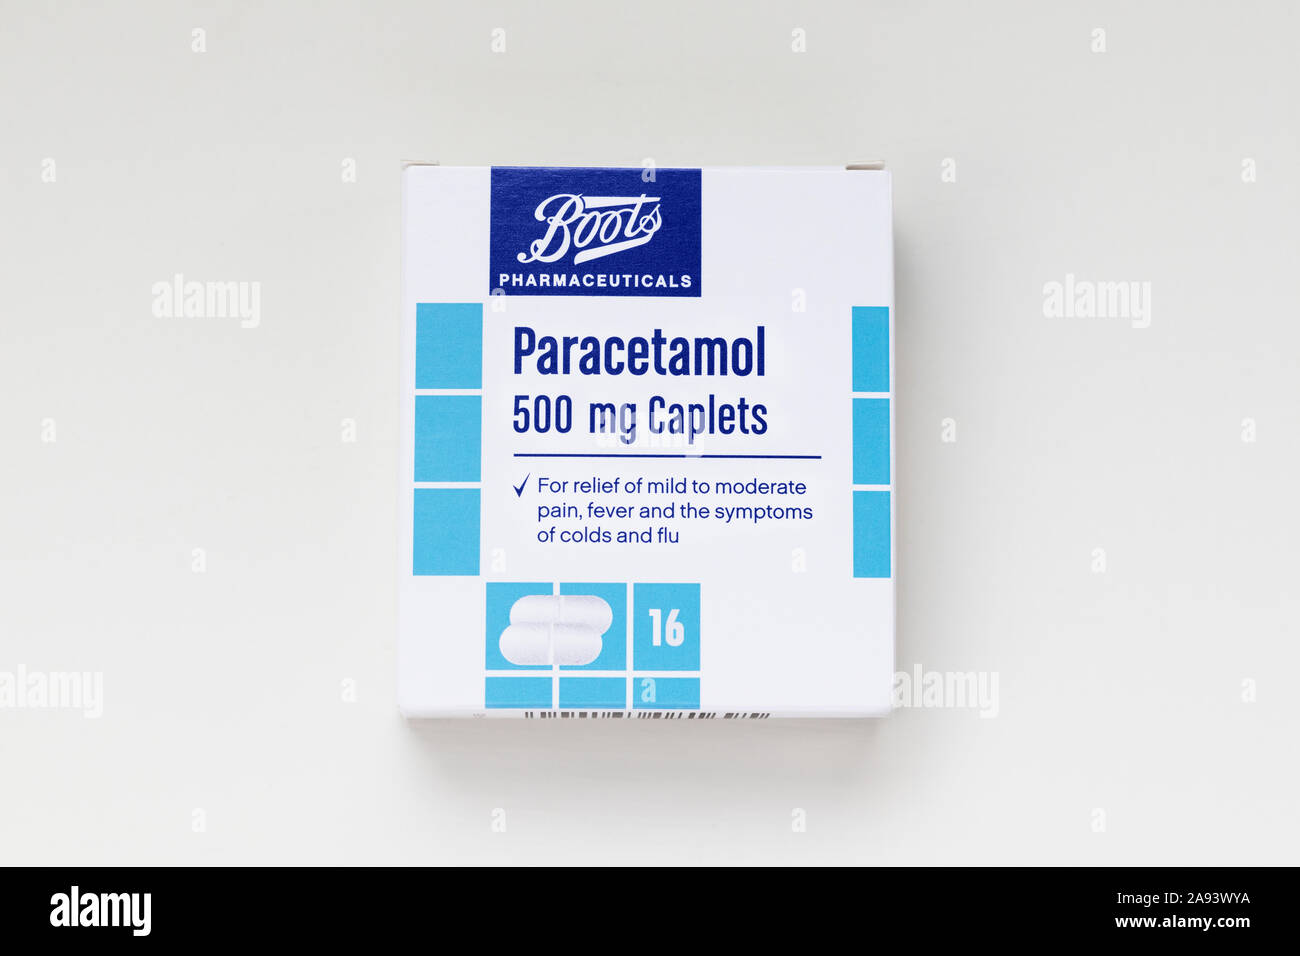 London / UK - November 12 2019 - Packet of Paracetamol from Boots pharmacy, top view. Boots UK Ltd is a health and beauty retailer and pharmacy chain Stock Photo